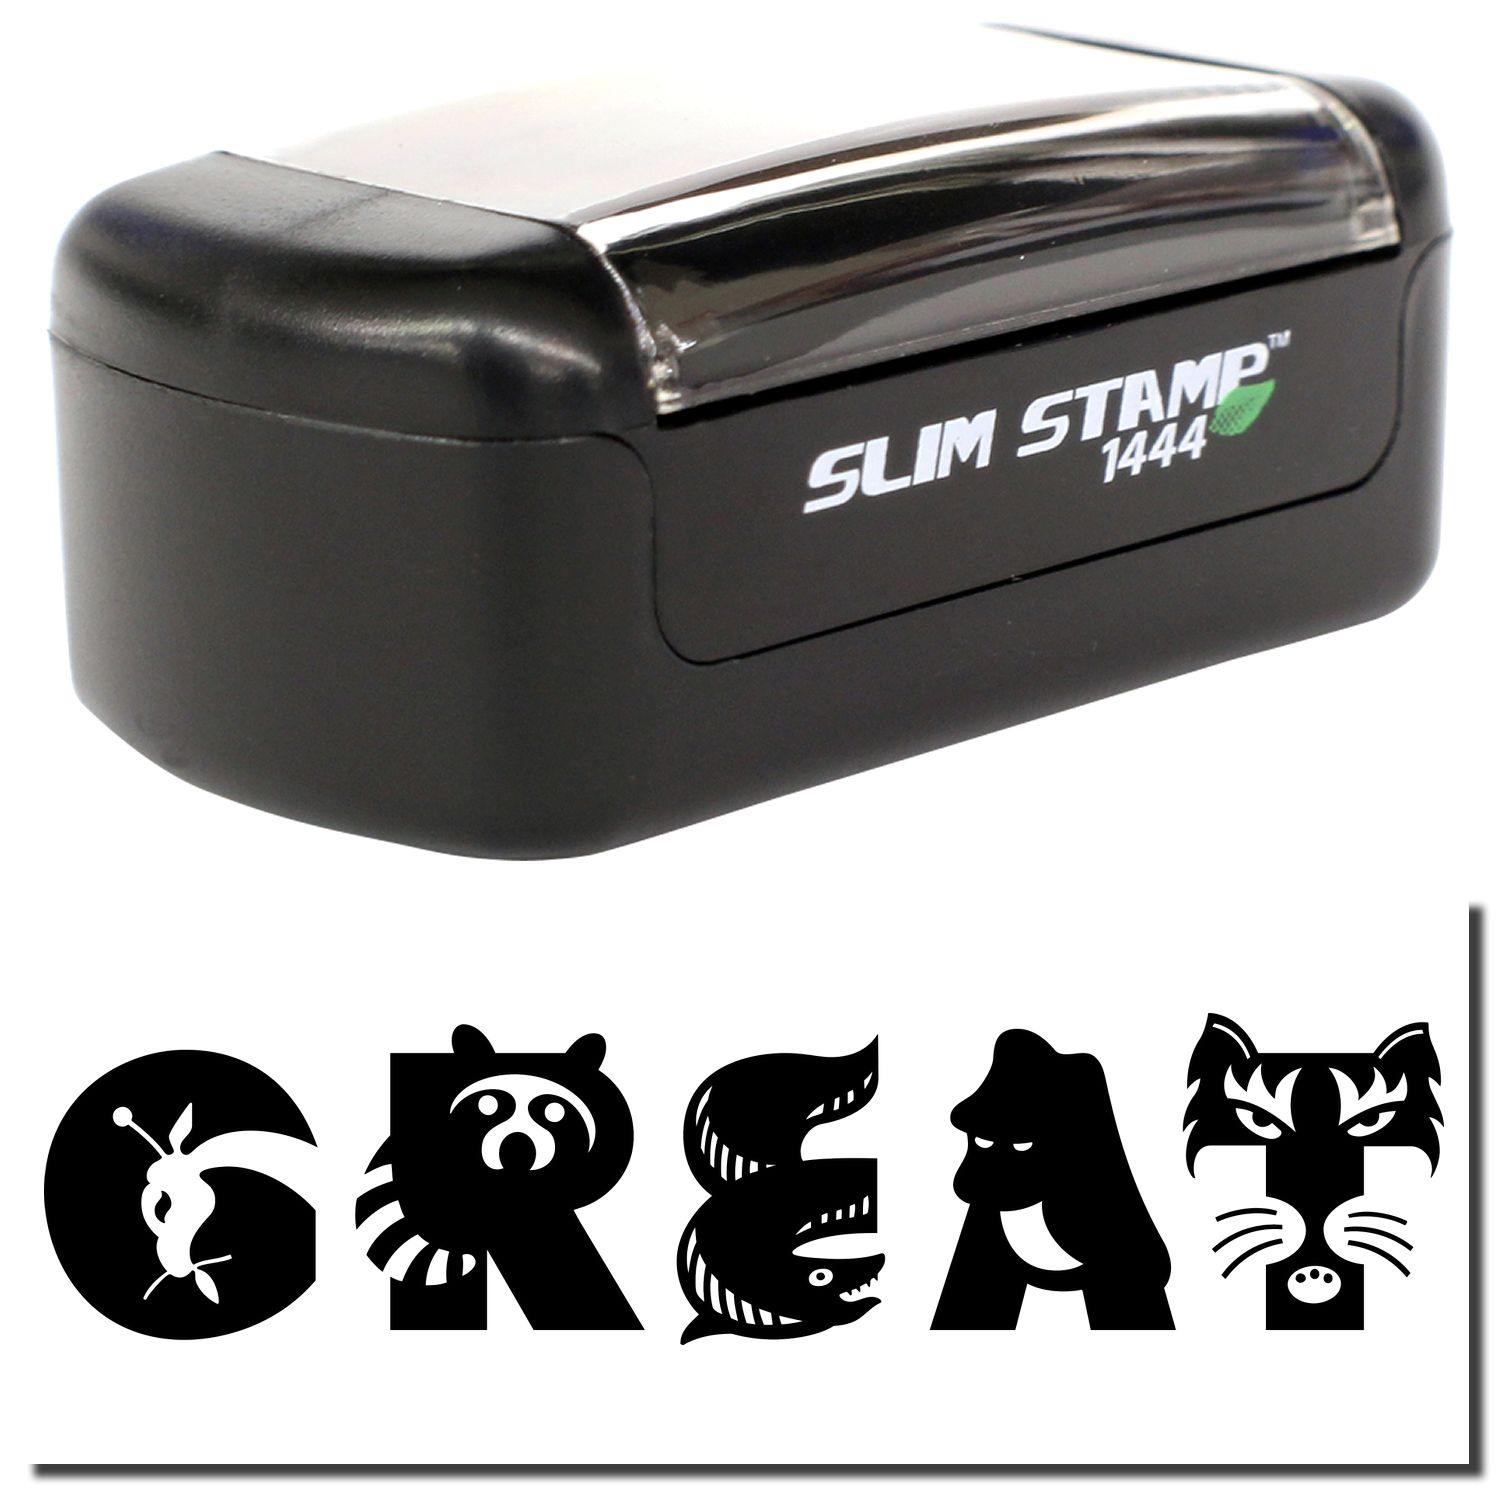 A stock office pre-inked stamp with a stamped image showing how the text "GREAT" (Each letter in the word "GREAT" resembles an animal, including a giraffe, raccoon, eel, ape, and tiger) is displayed after stamping.